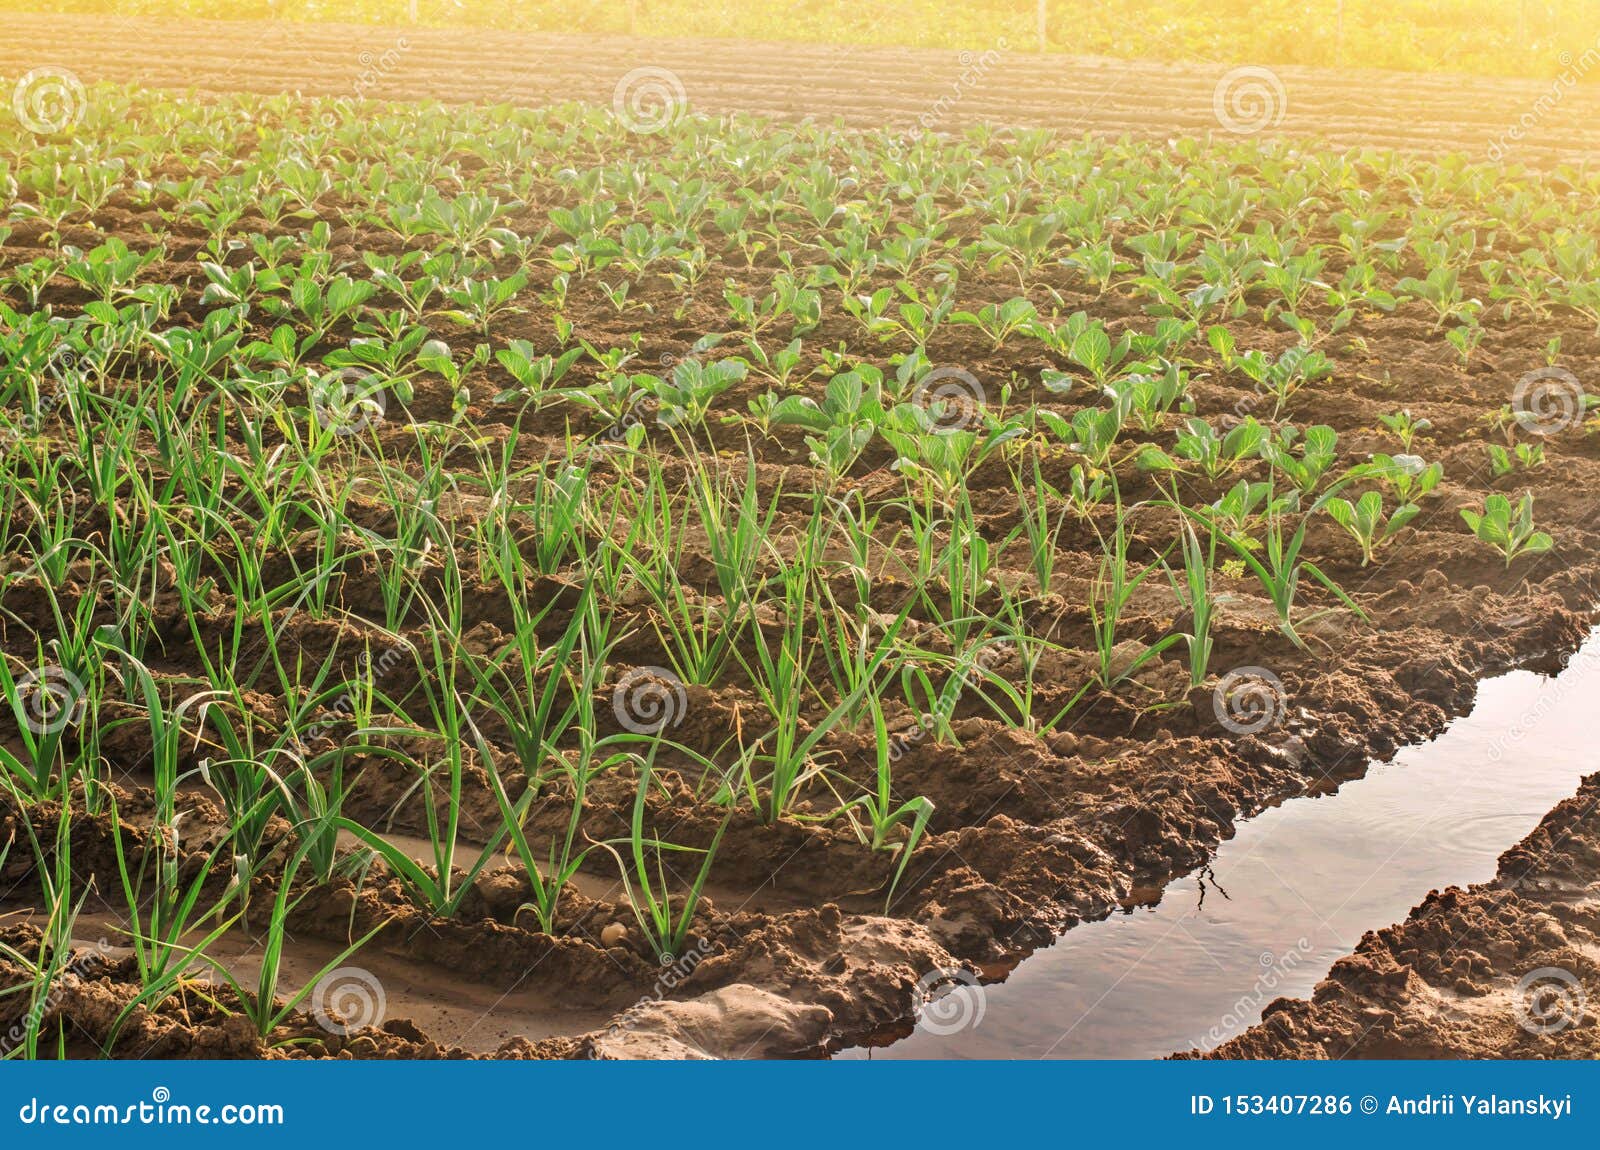 leek and young cabbage plantations. growing vegetables on the farm, harvesting for sale. agribusiness and farming. countryside.